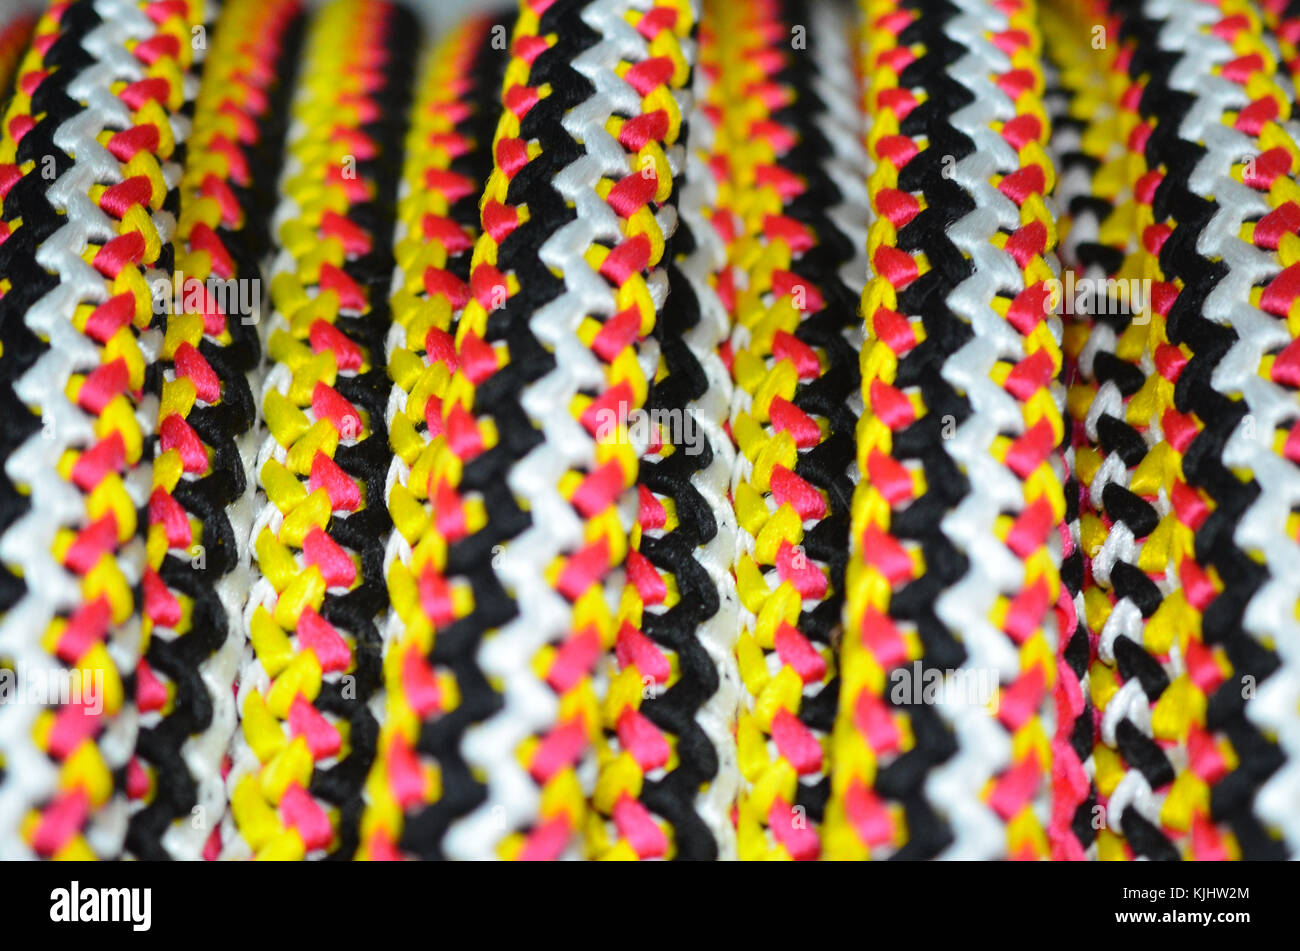 A ball of multi-colored rope for lifting heavy loads close-up Stock Photo